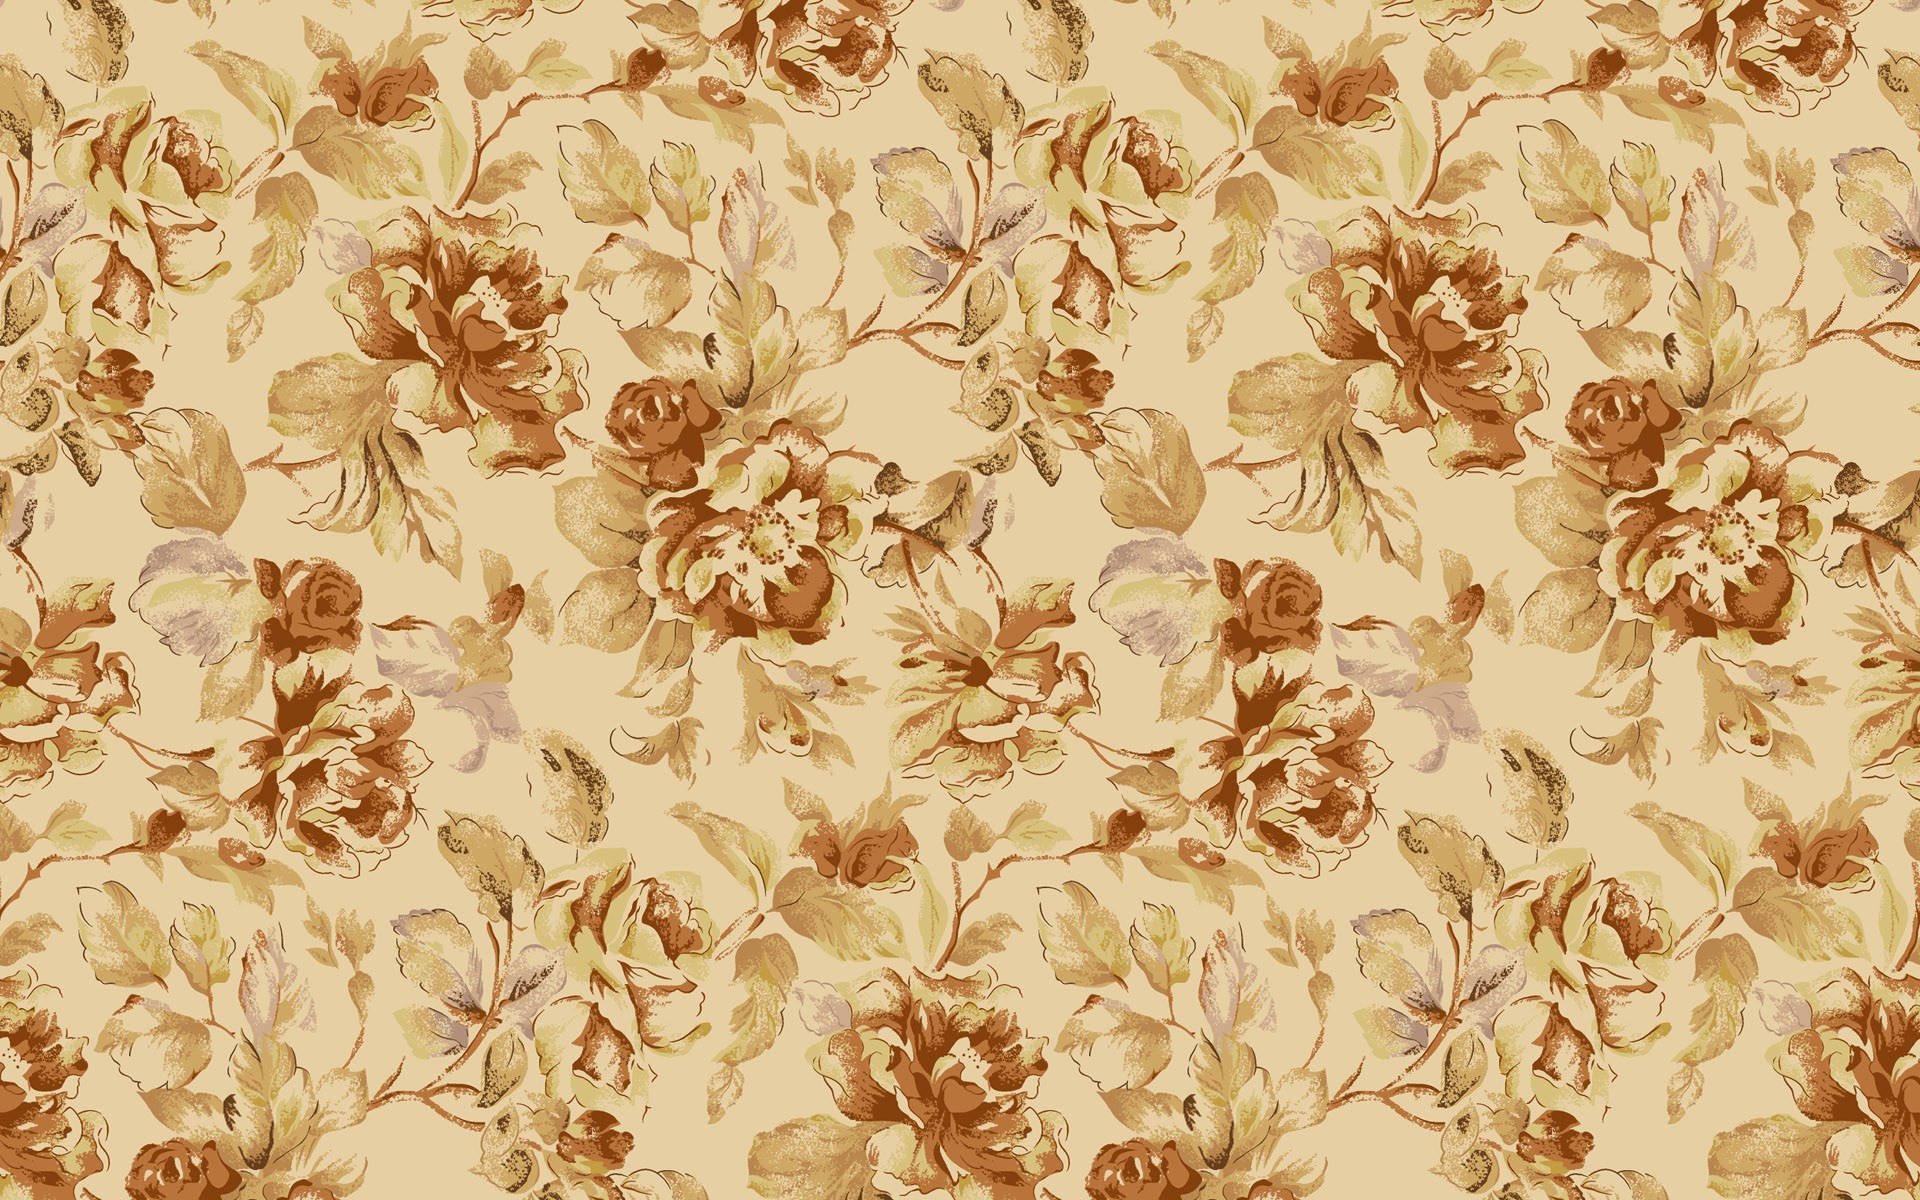 How Does The Floral Vintage Wallpaper E In Handy